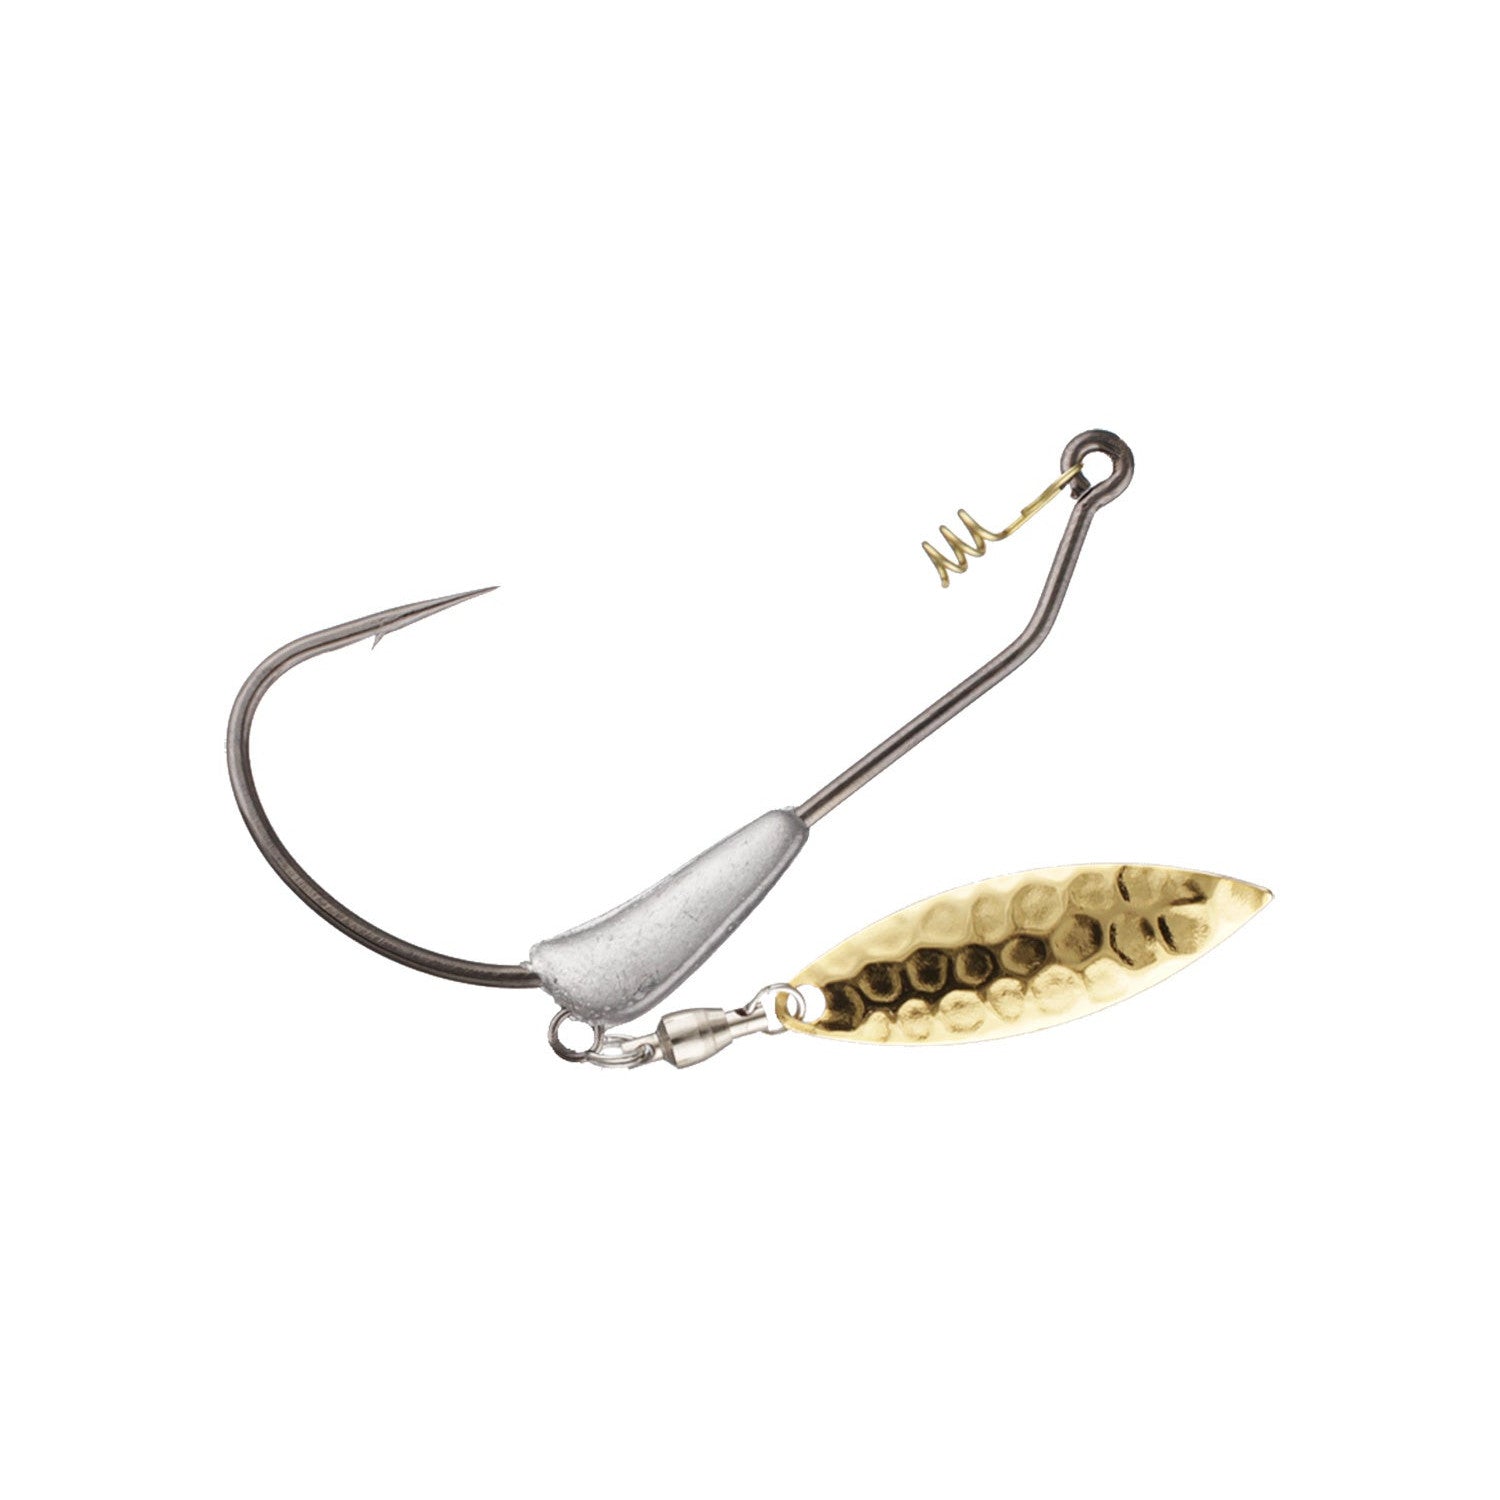 Owner Beast Hook 5130W w/ Centering Pin Weighted Swimbait Hook – Vast  Fishing Tackle